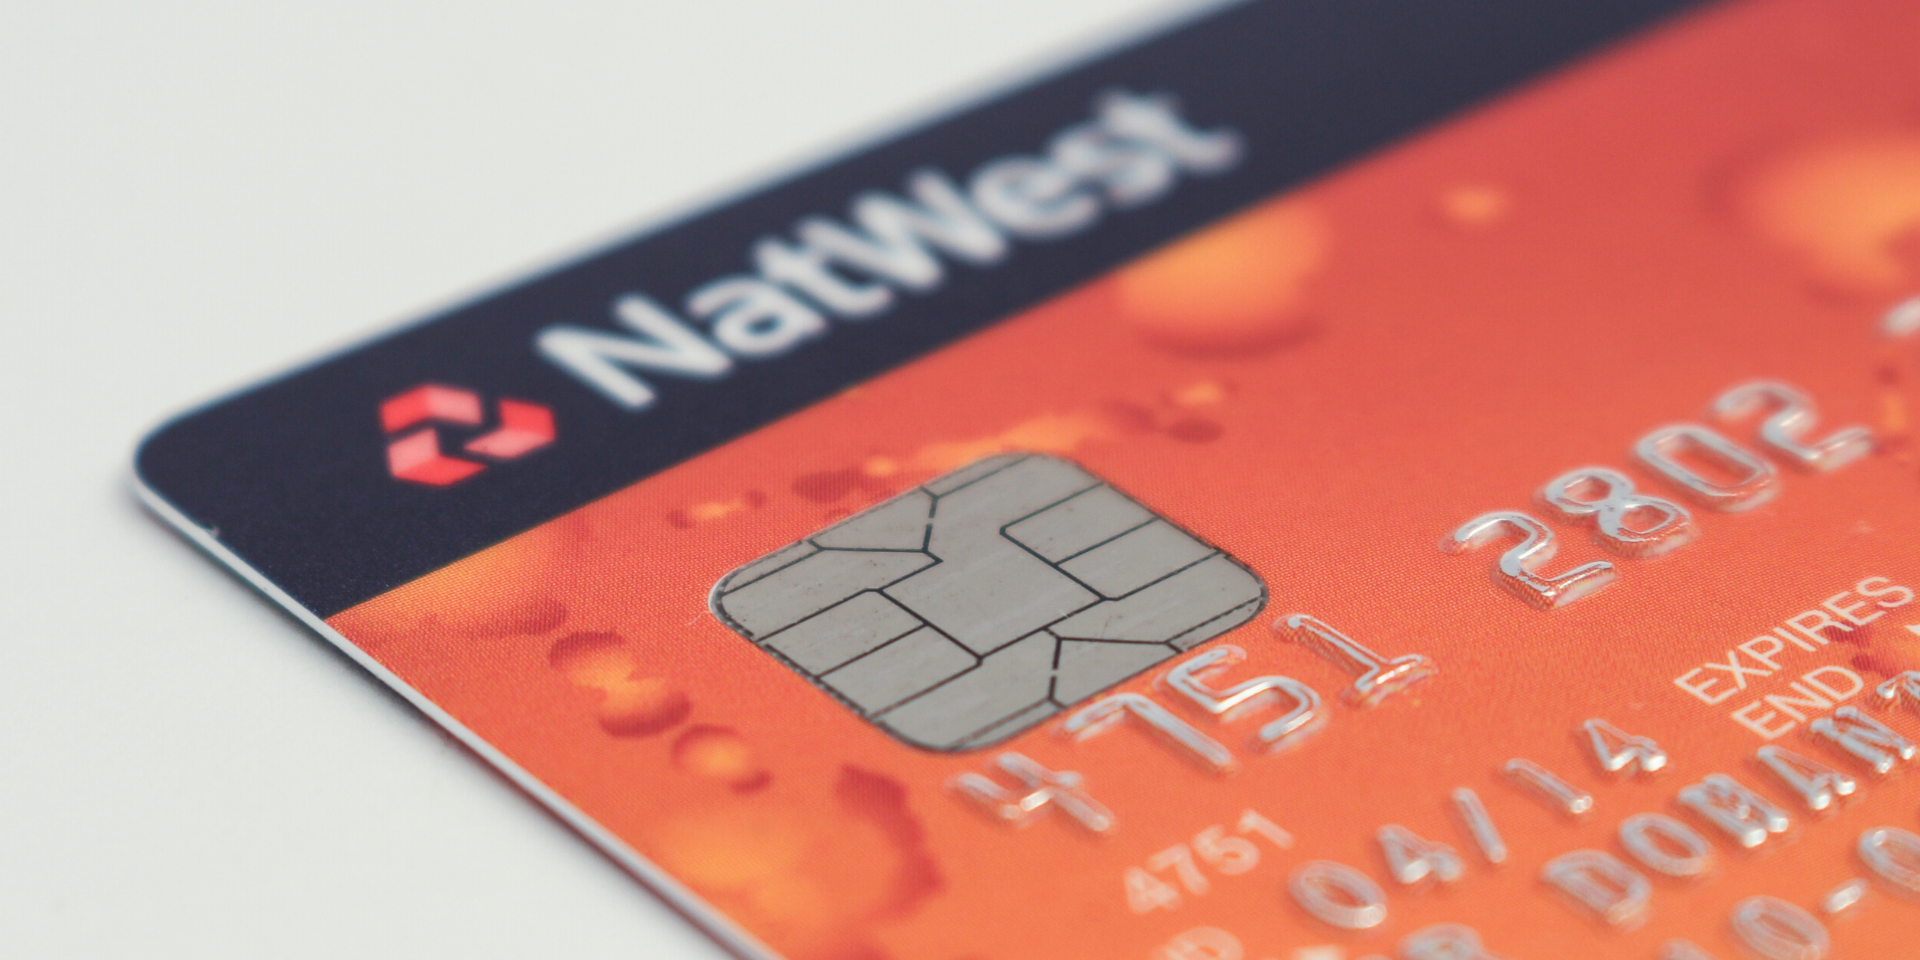 NatWest Plead Guilty to Spoofing Charges, Will Pay $35m